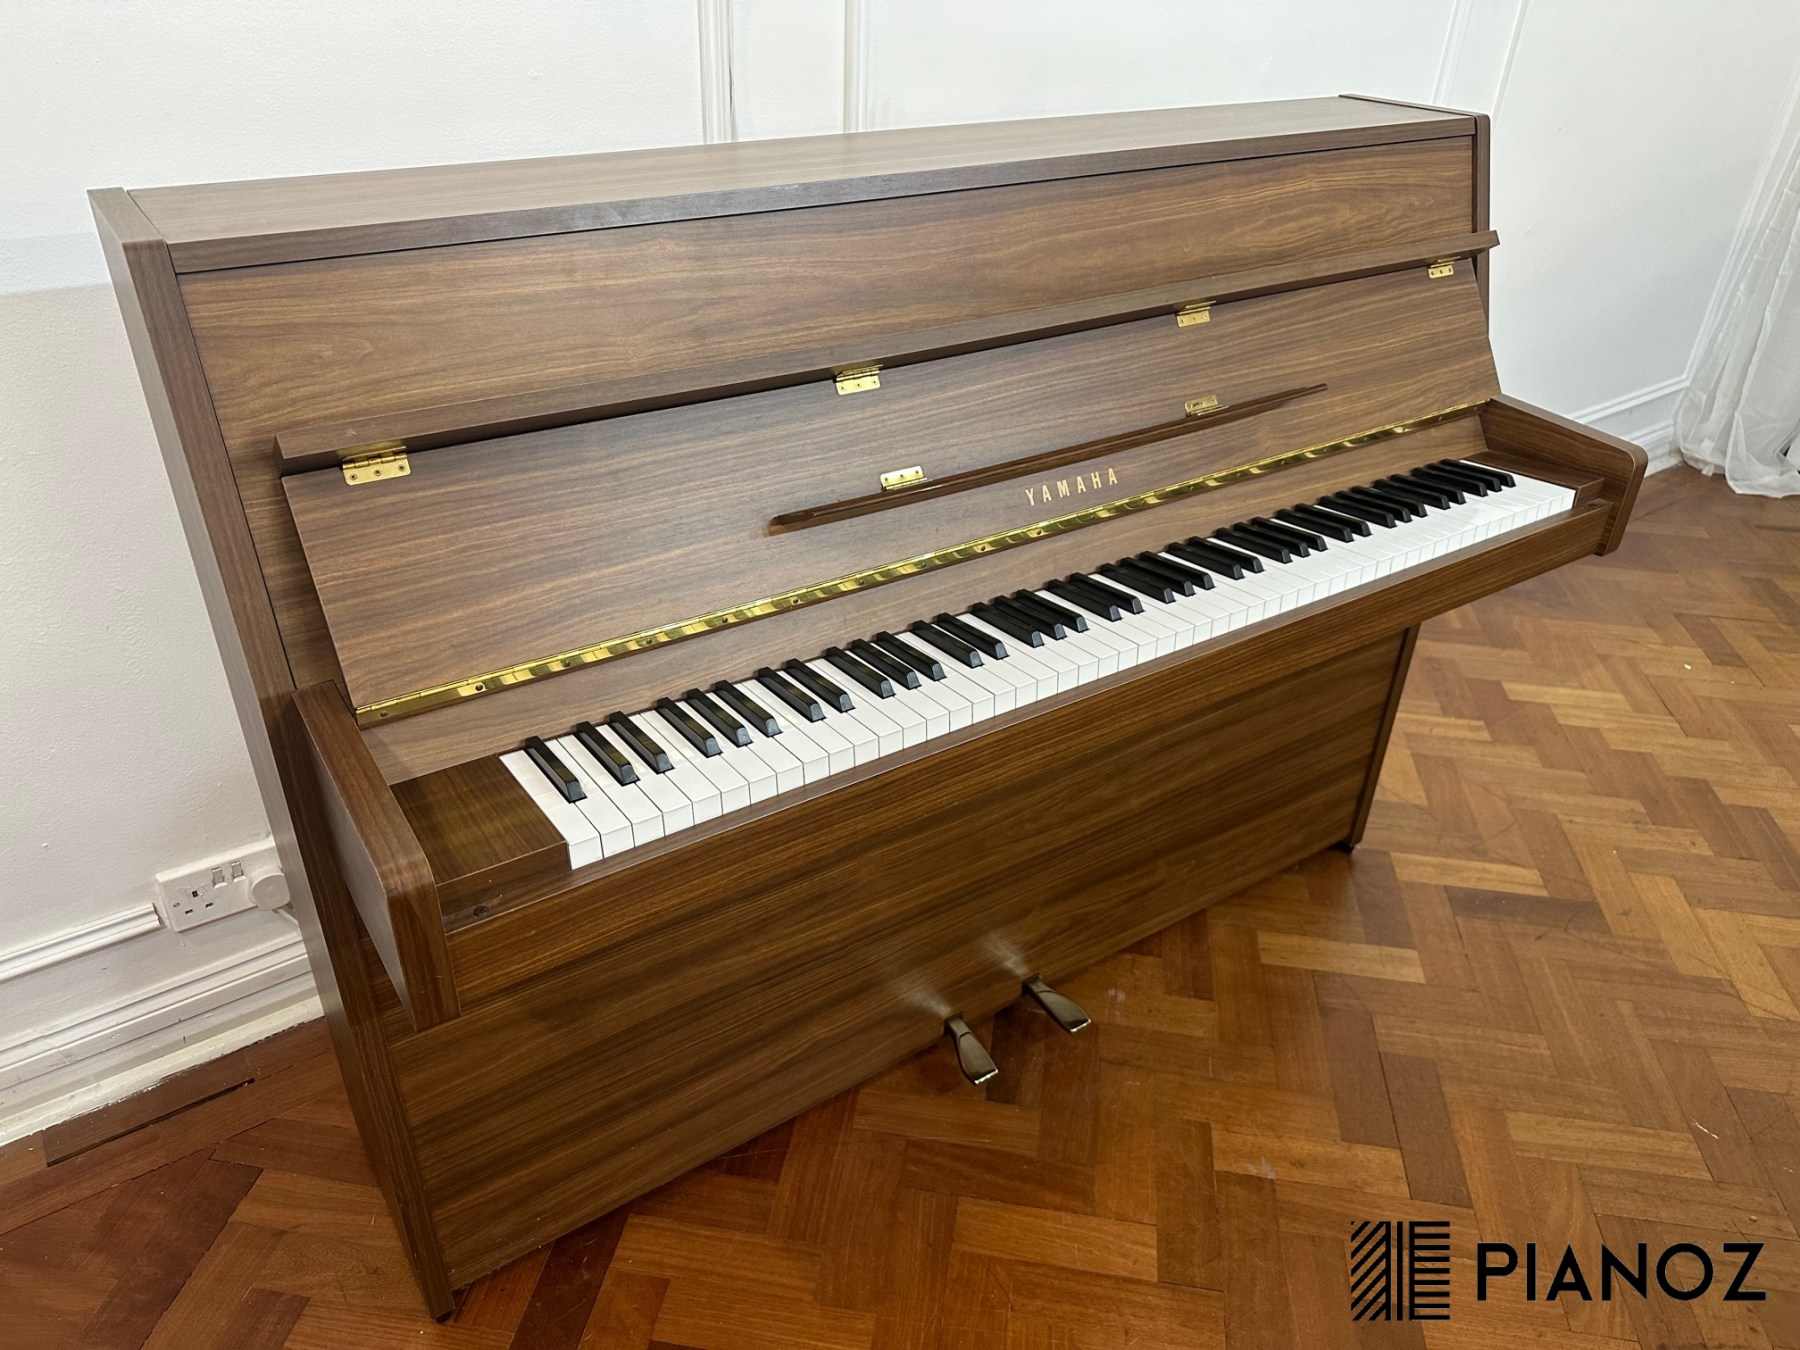 Yamaha E108 1999 Upright Piano piano for sale in UK